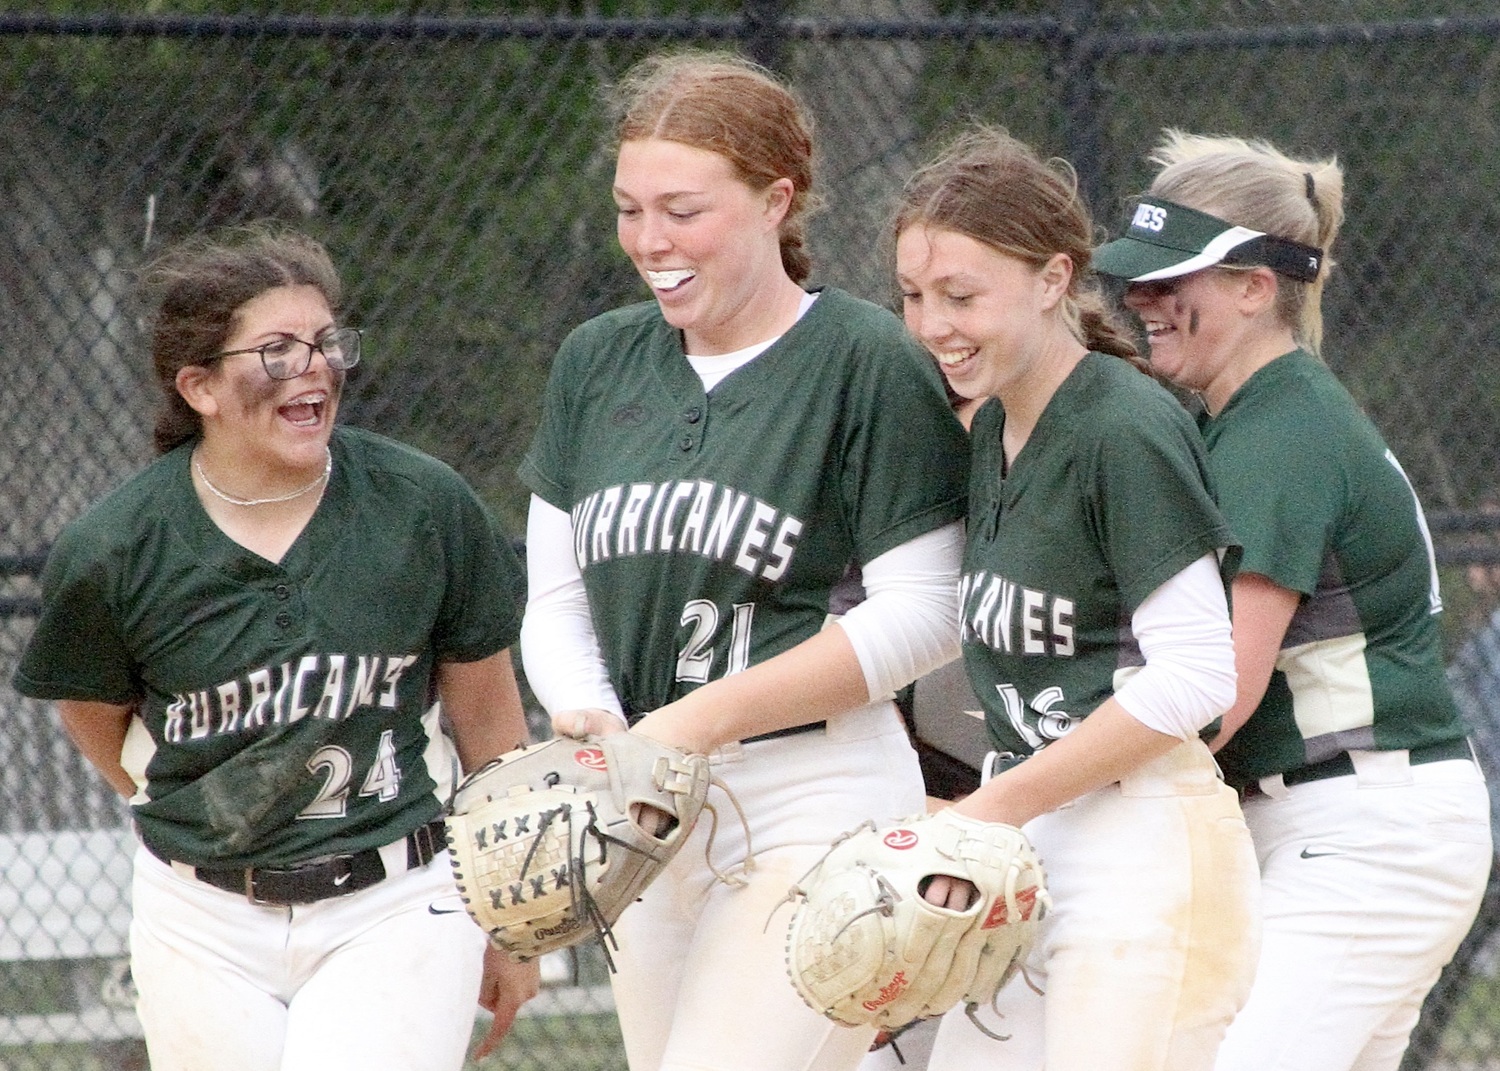 Westhampton Beach softball team members are all smiles making it to the next round of playoffs. DESIRÉE KEEGAN